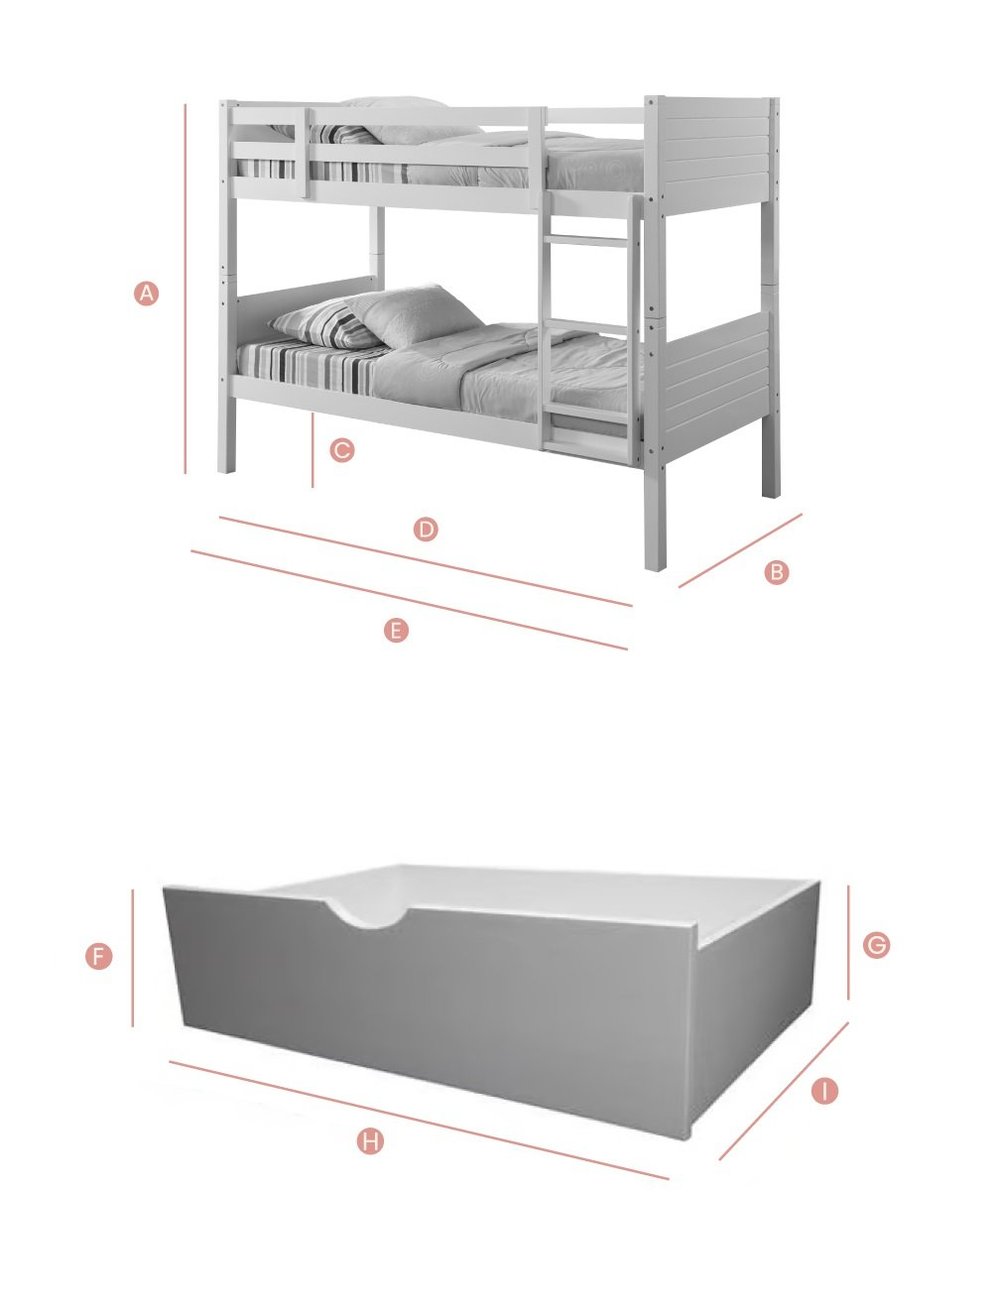 Happy Beds Bedford White Bunk Bed Sketch Dimensions